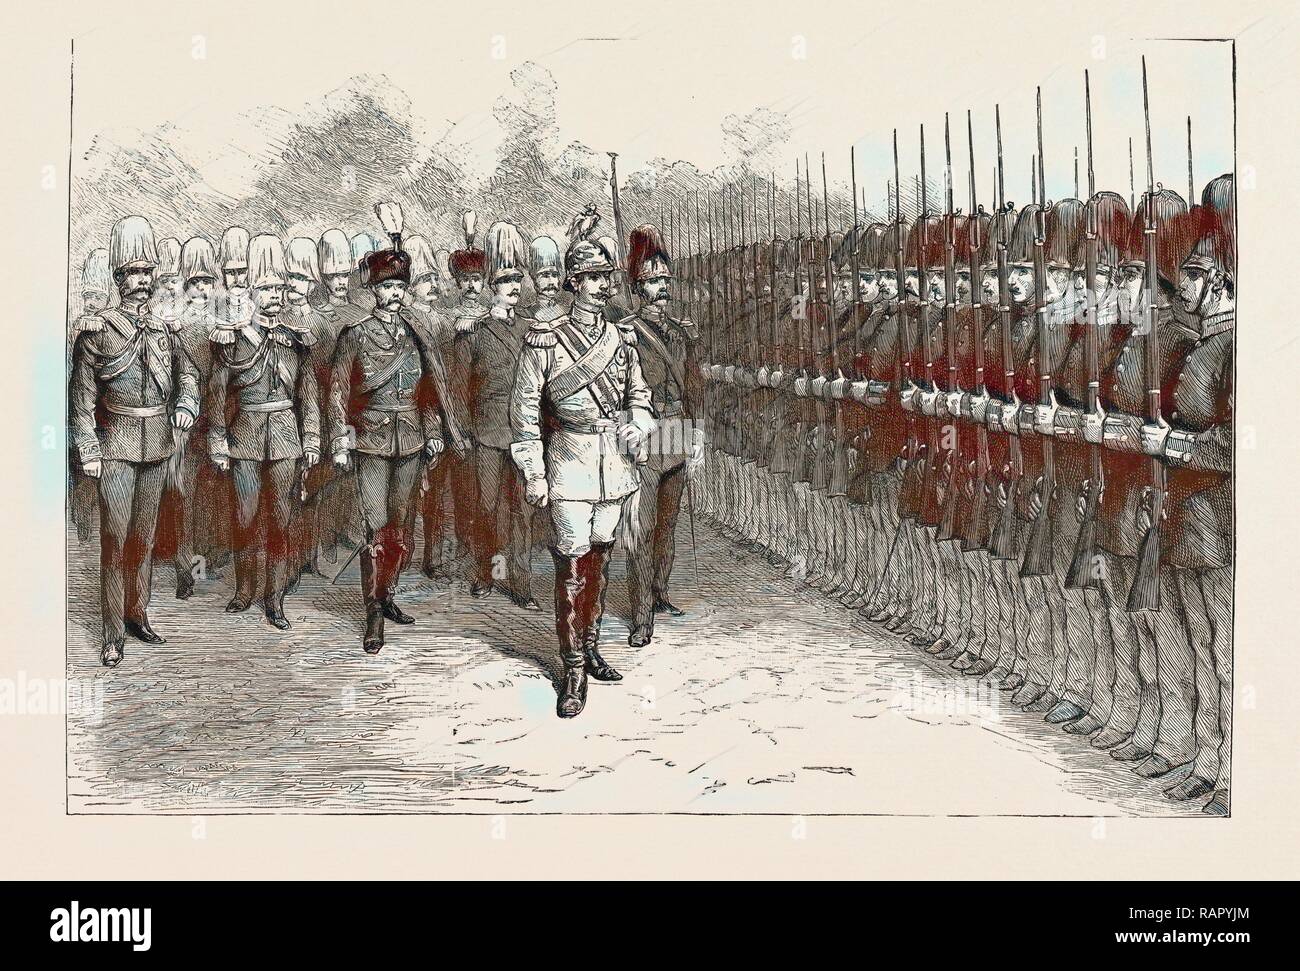 SCENES FROM THE EVERY DAY LIFE OF THE GERMAN EMPEROR, 1889: THE EMPEROR INSPECTING INFANTRY OF THE LINE. Reimagined Stock Photo